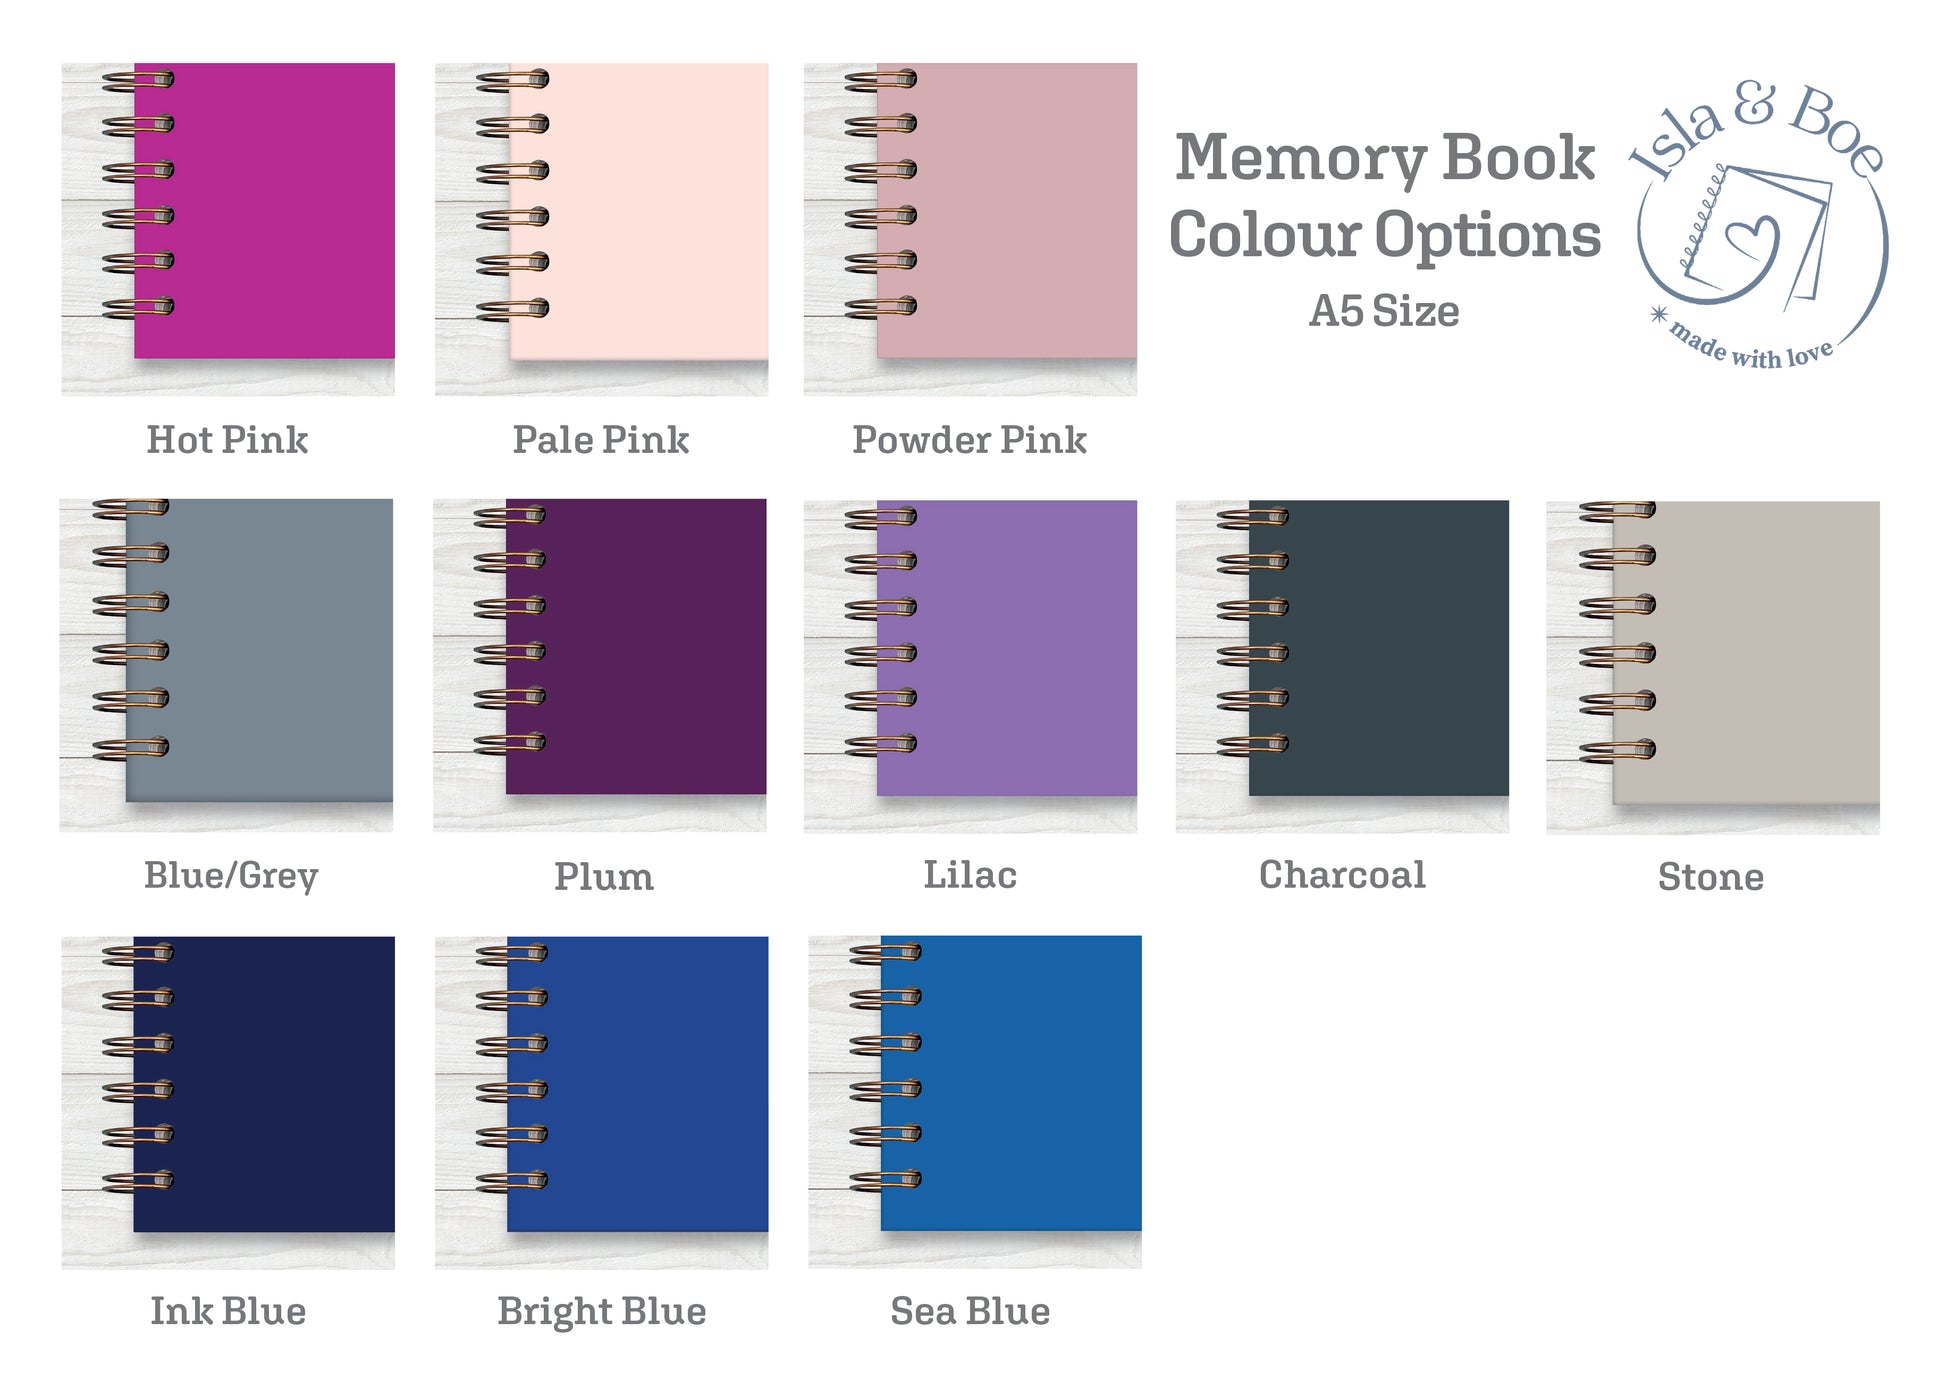 A5 memory book colour options. Hot Pink, Lilac, Powder Pink, Blue/Grey, Plum, Charcoal, Stone, Sea Blue